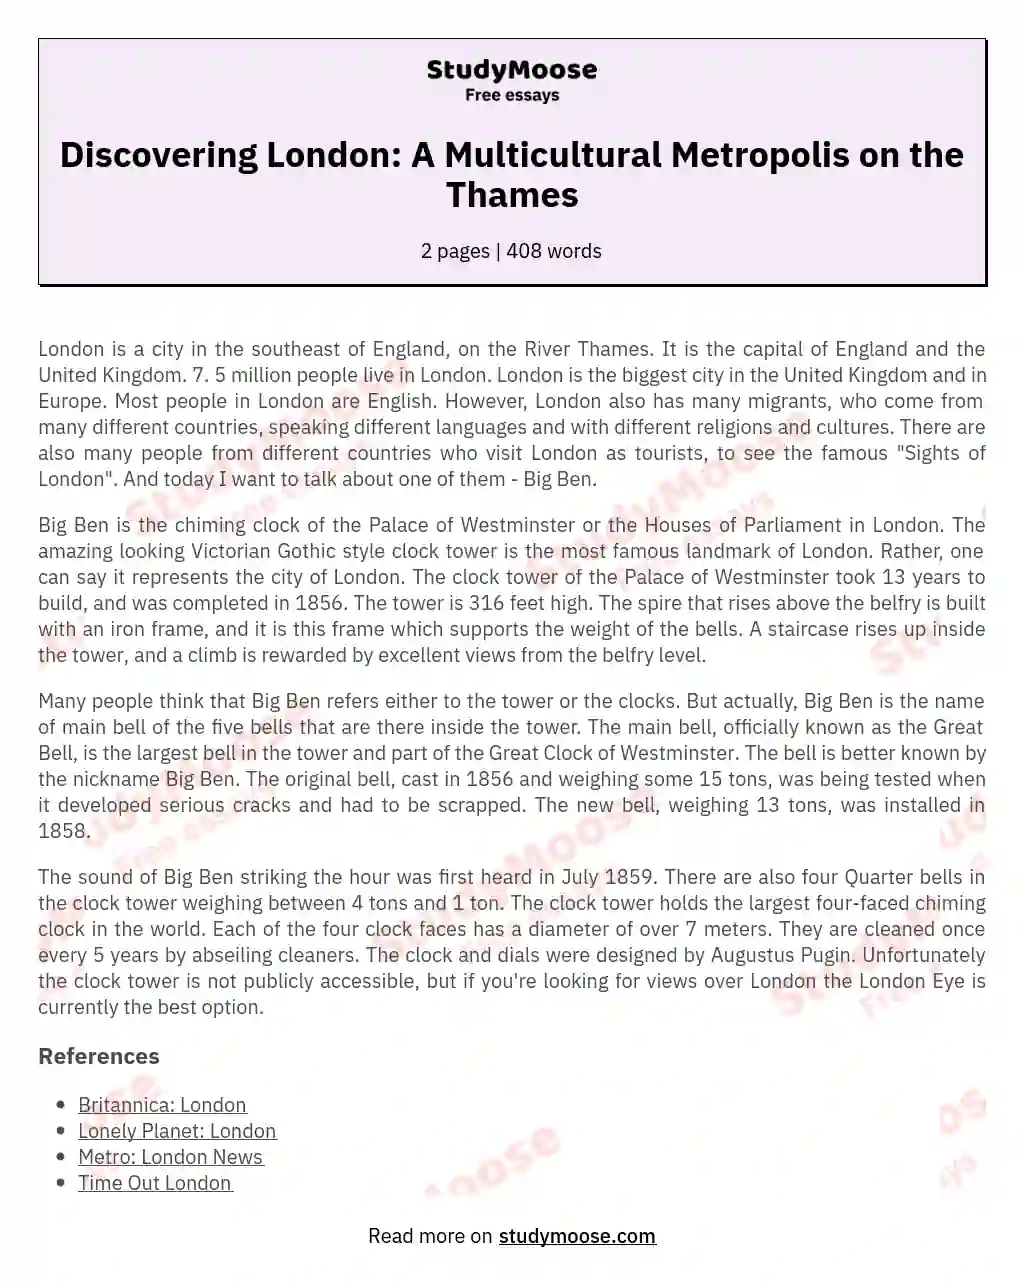 Discovering London: A Multicultural Metropolis on the Thames essay